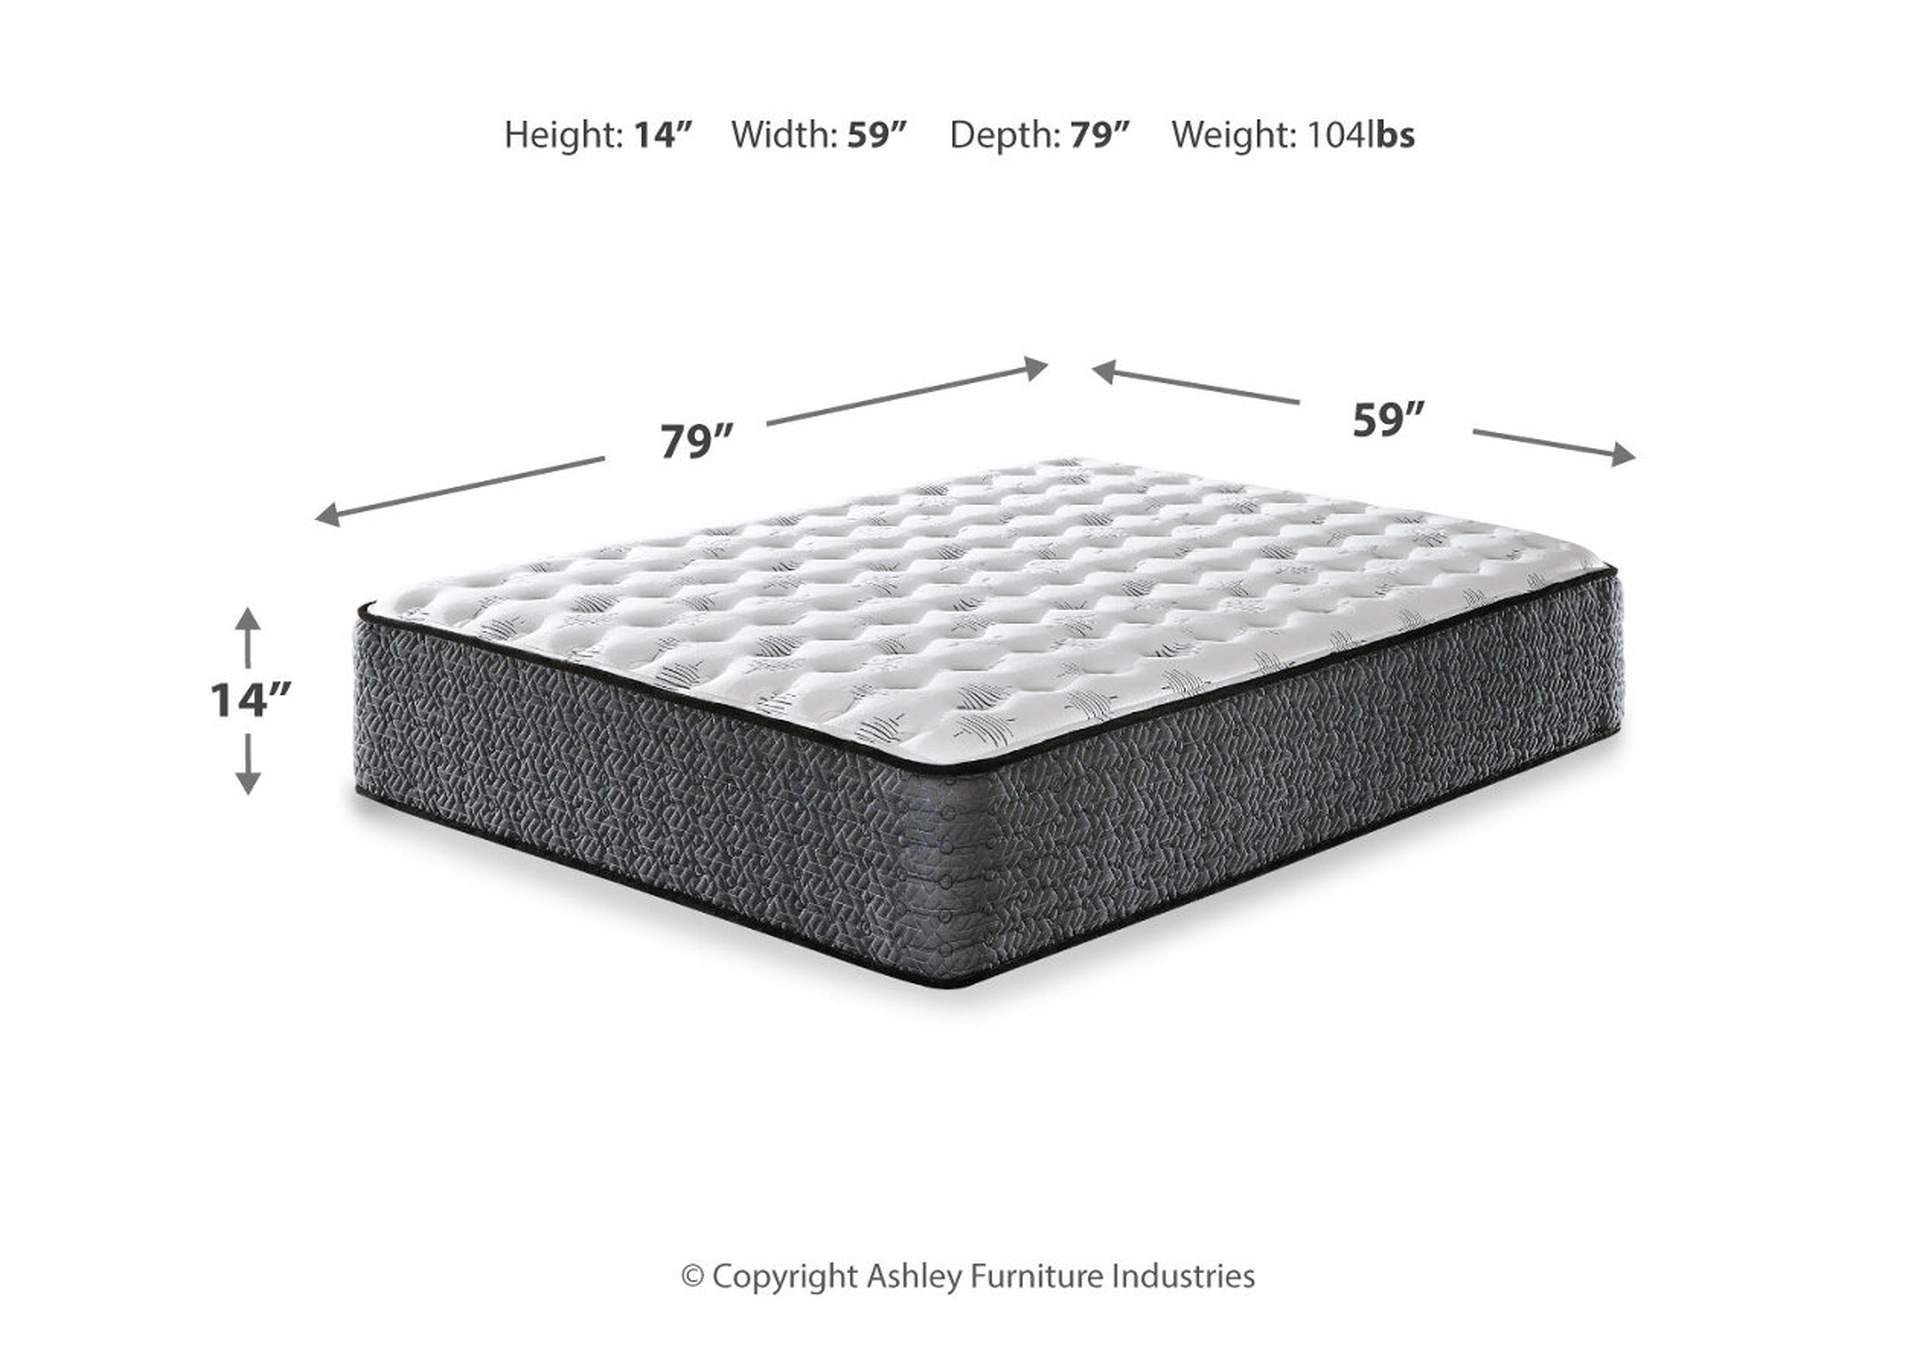 Ultra Luxury Firm Tight Top with Memory Foam Mattress with Adjustable Base,Sierra Sleep by Ashley